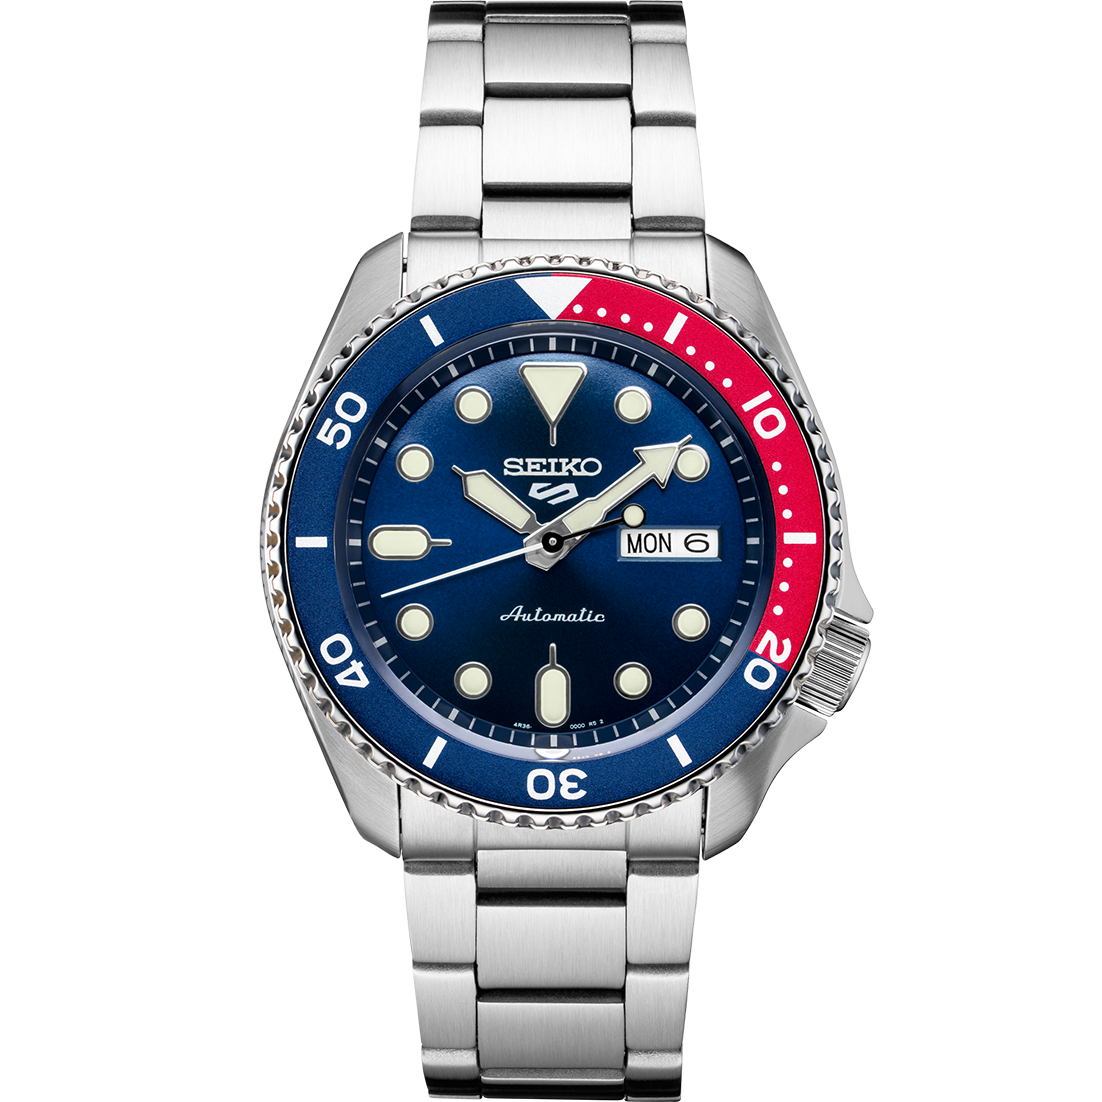 SEIKO 5 Mens Automatic Watch SRPD53